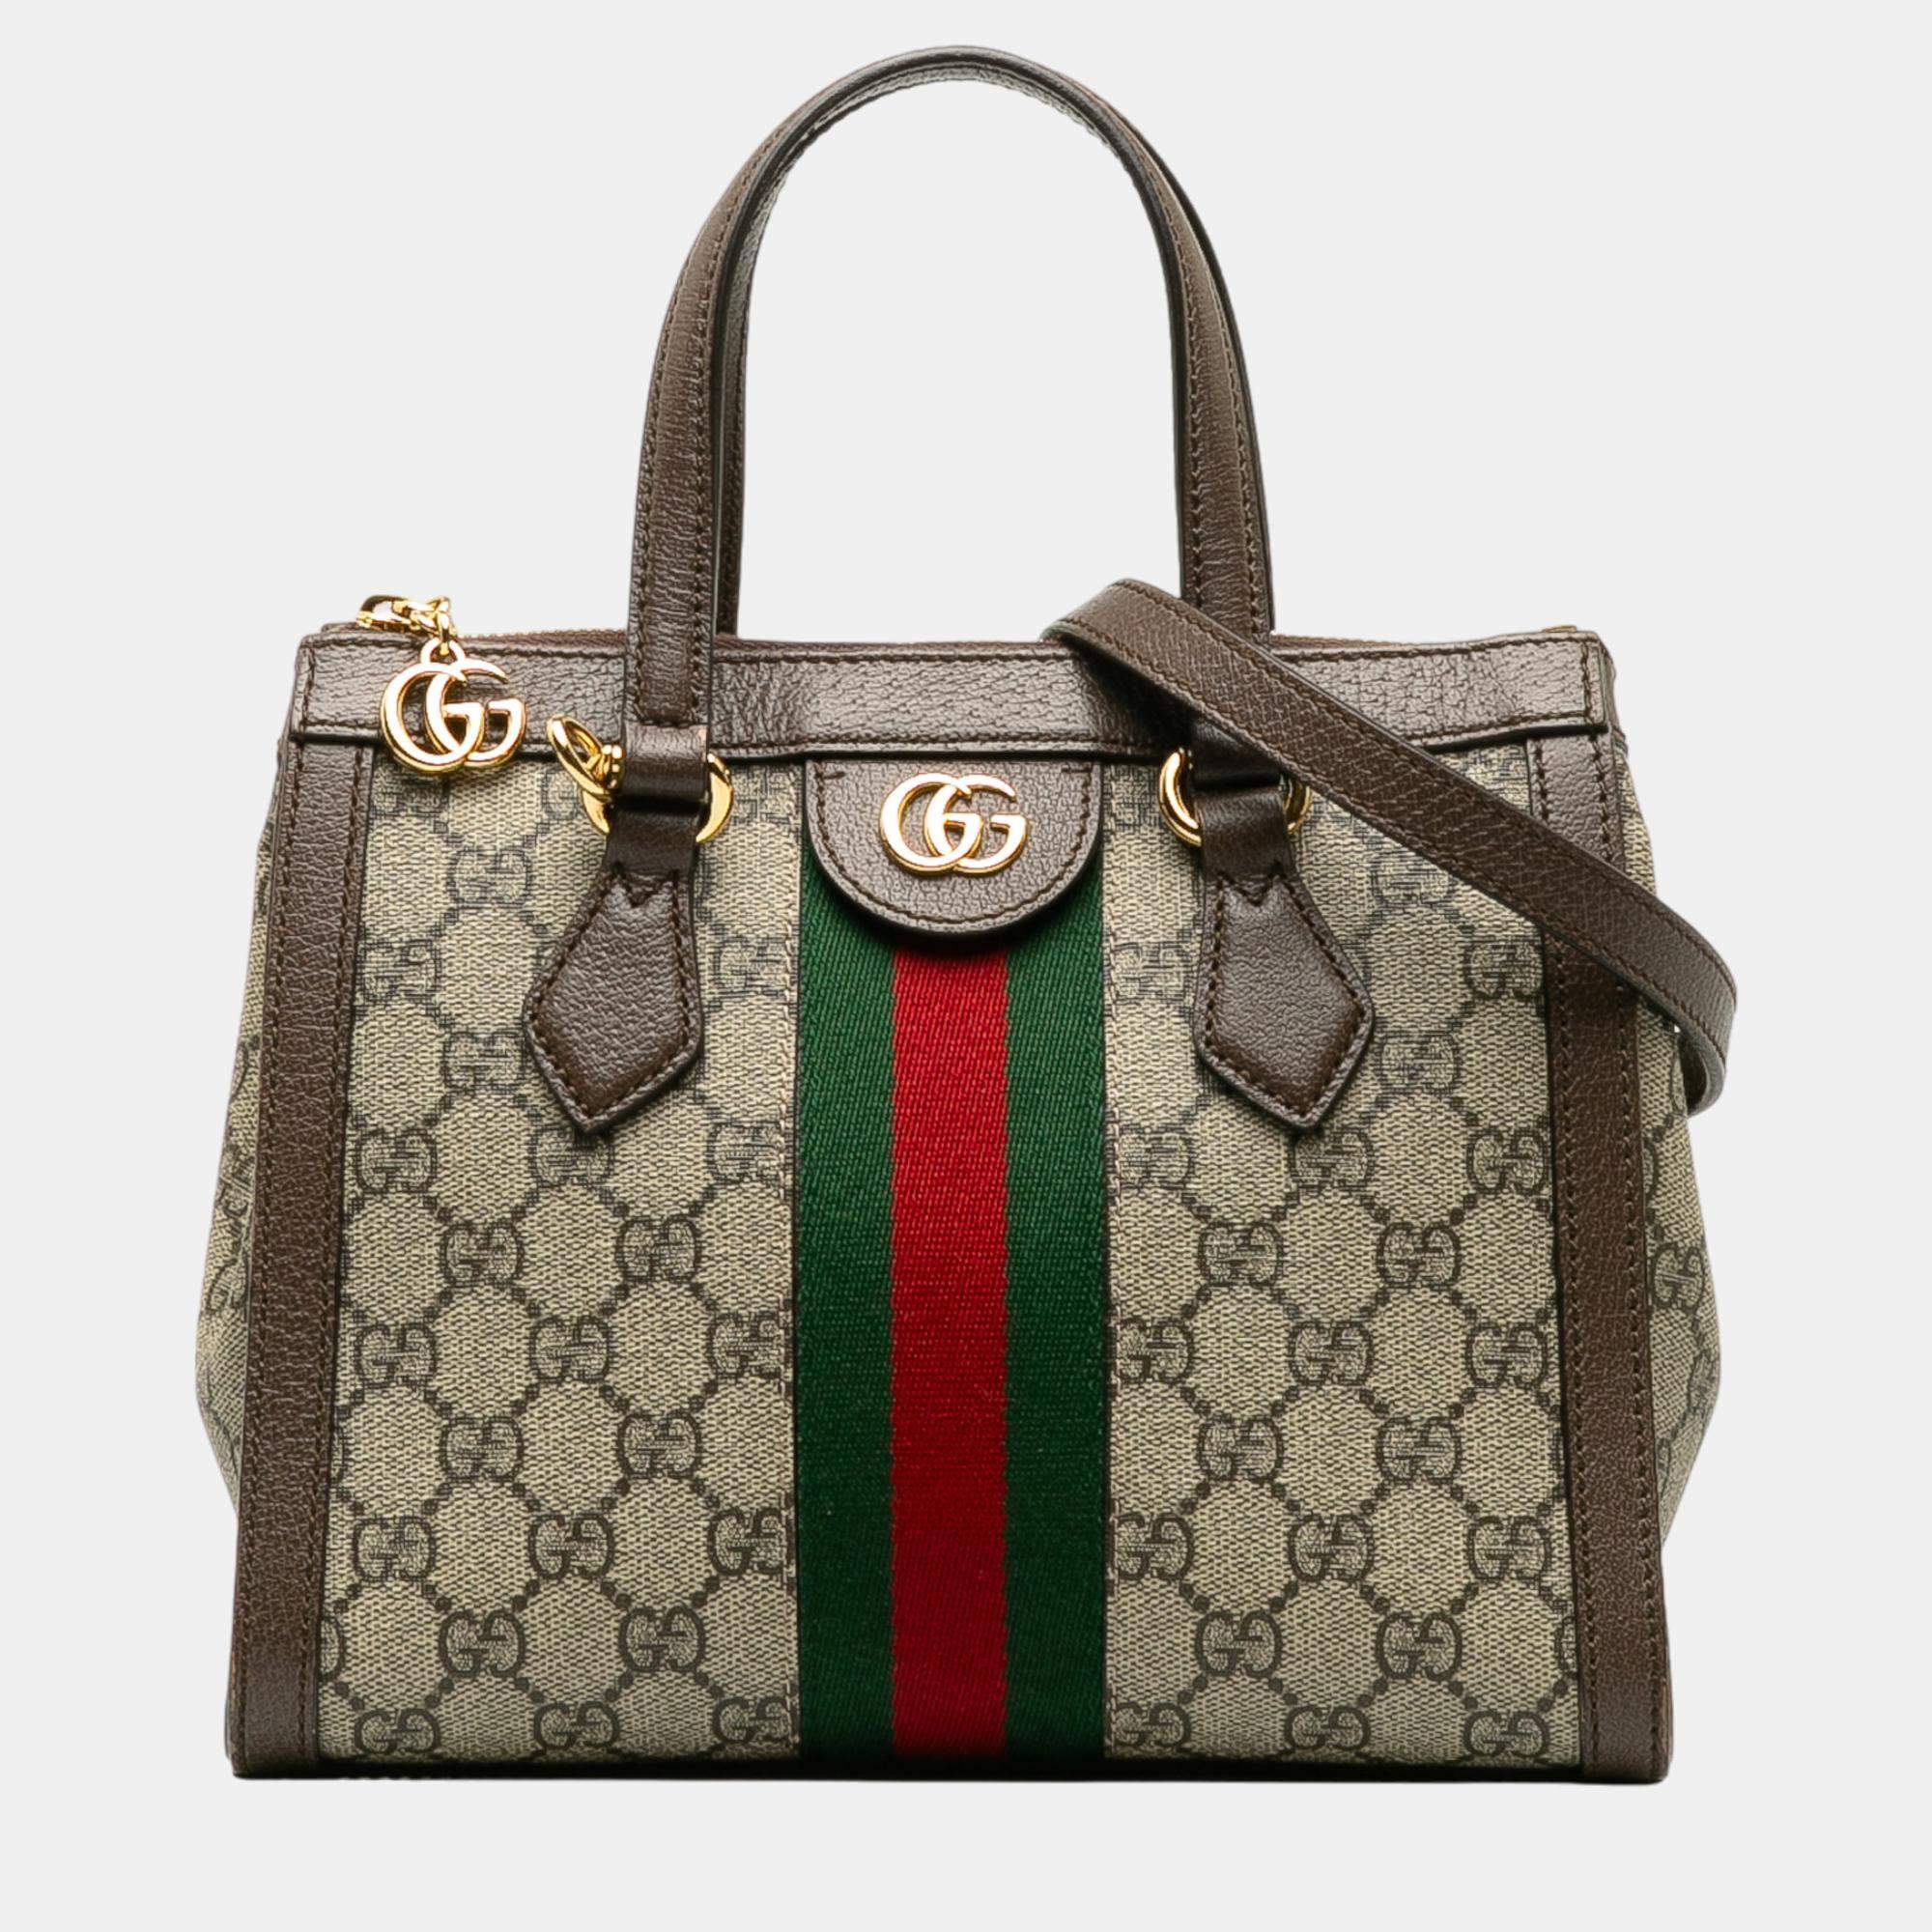 Gucci Beige/Brown Small GG Supreme Ophidia Satchel